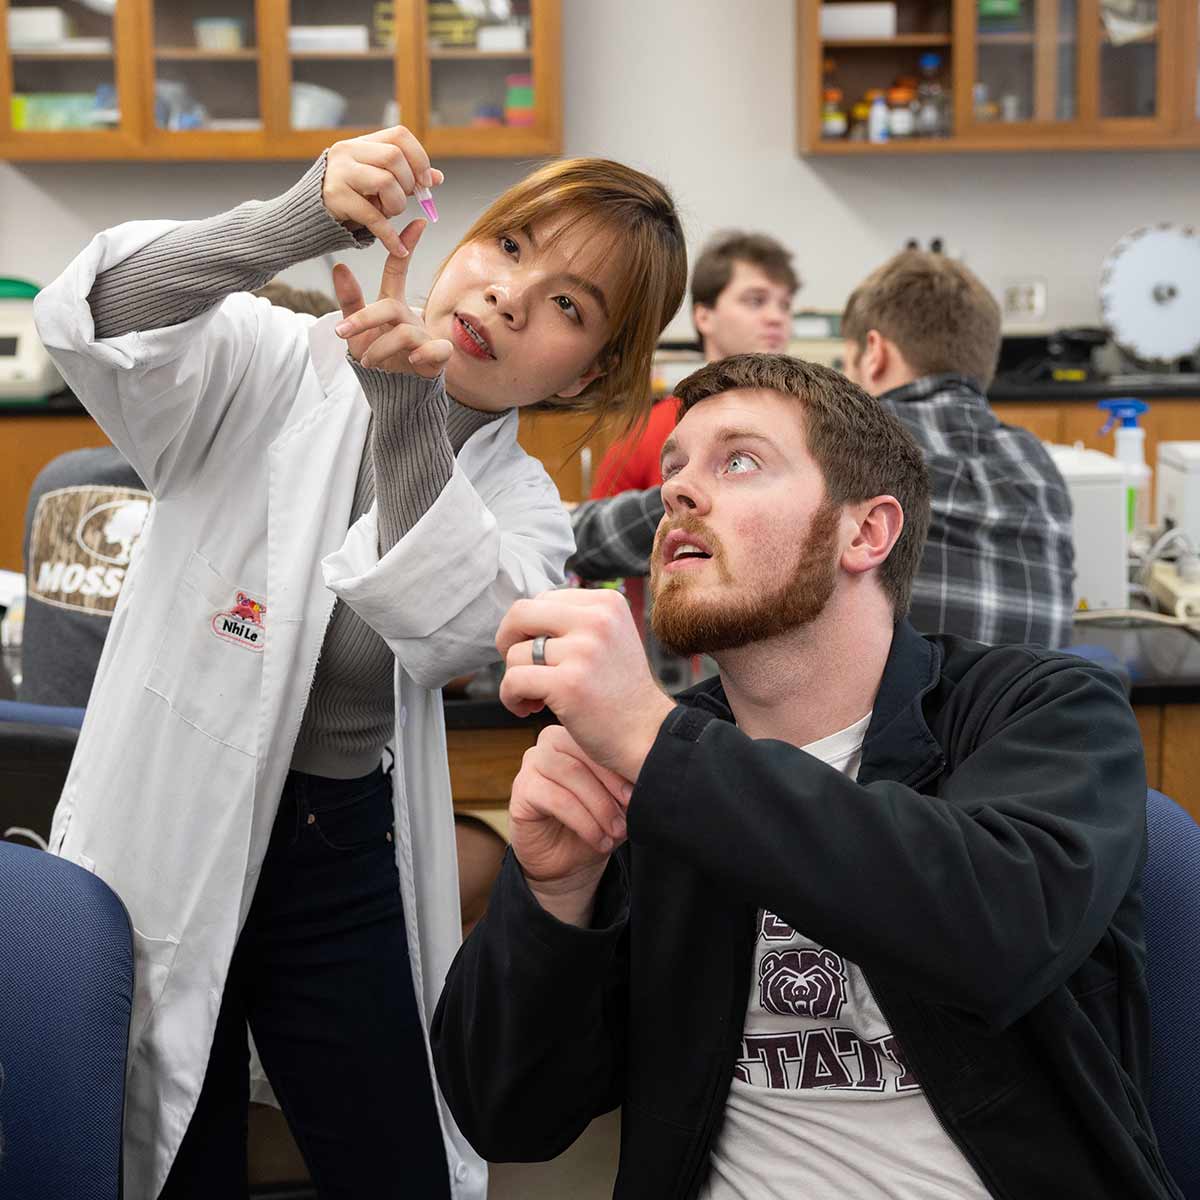 A biology teaching assistant instructing a student during a lab class.